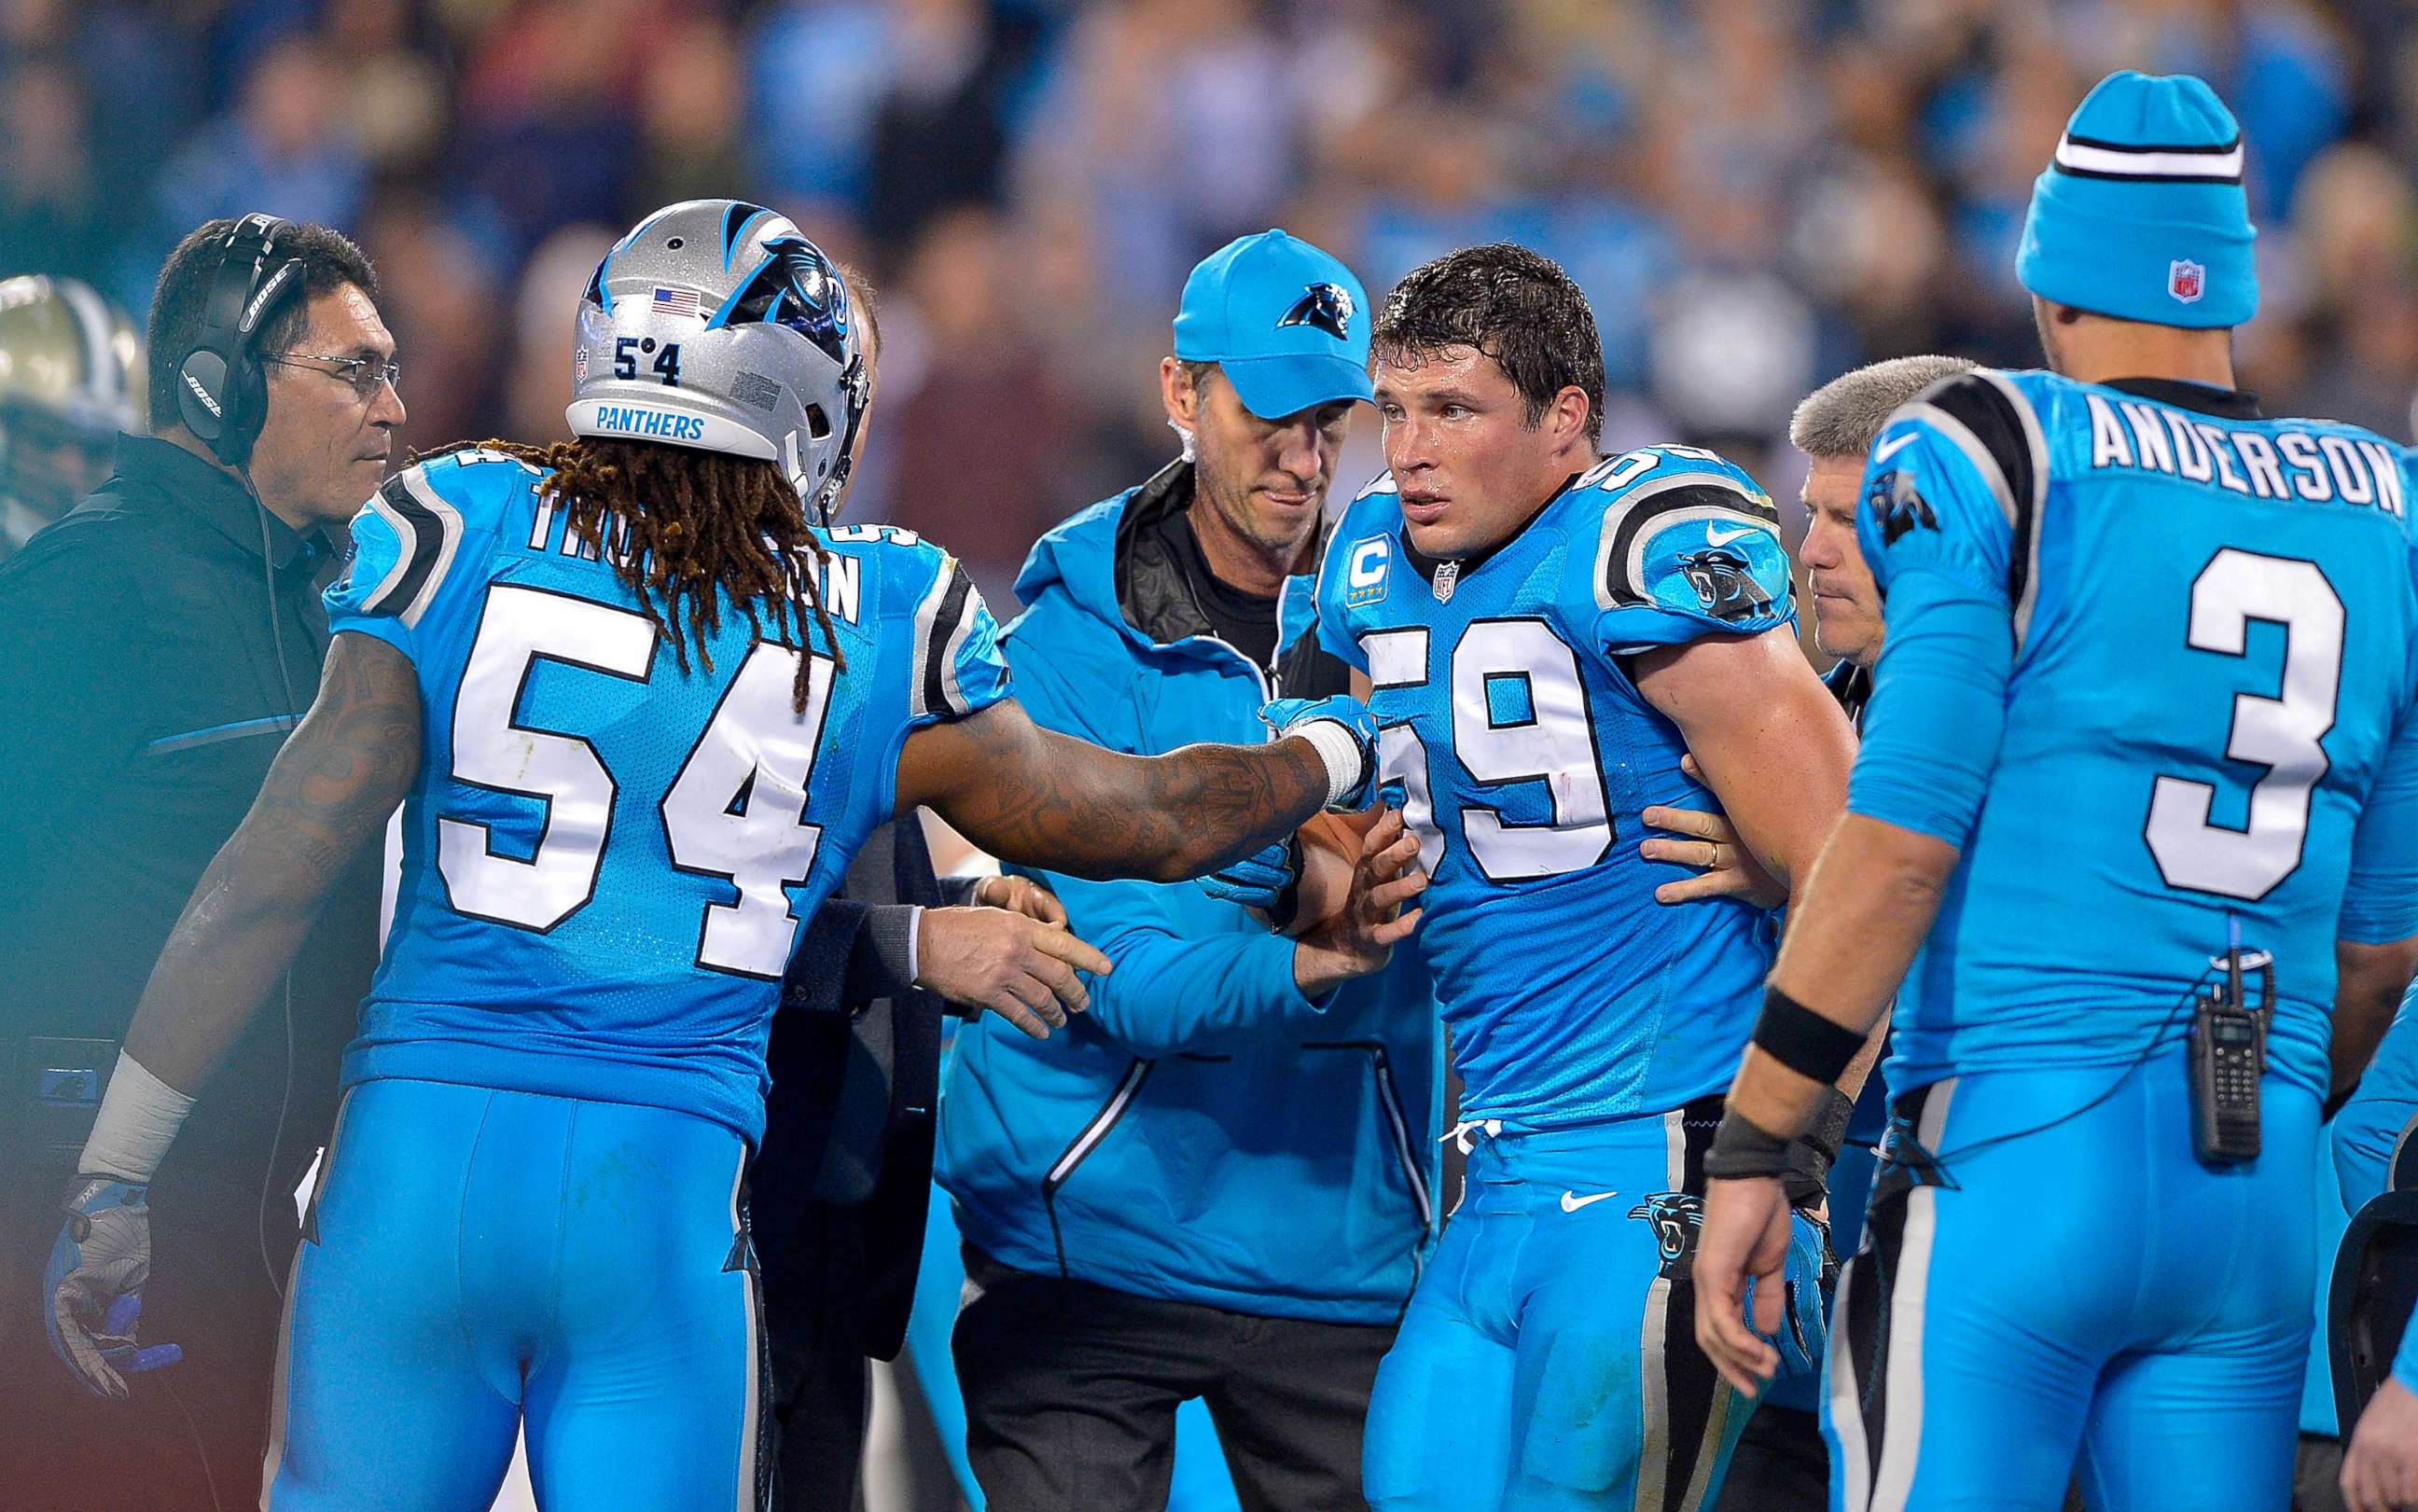 PHOTO: Luke Kuechly is carried off the field after an injury against the New Orleans Saints during the game at Bank of America Stadium in this Nov. 17, 2016 file photo in Charlotte, N.C.